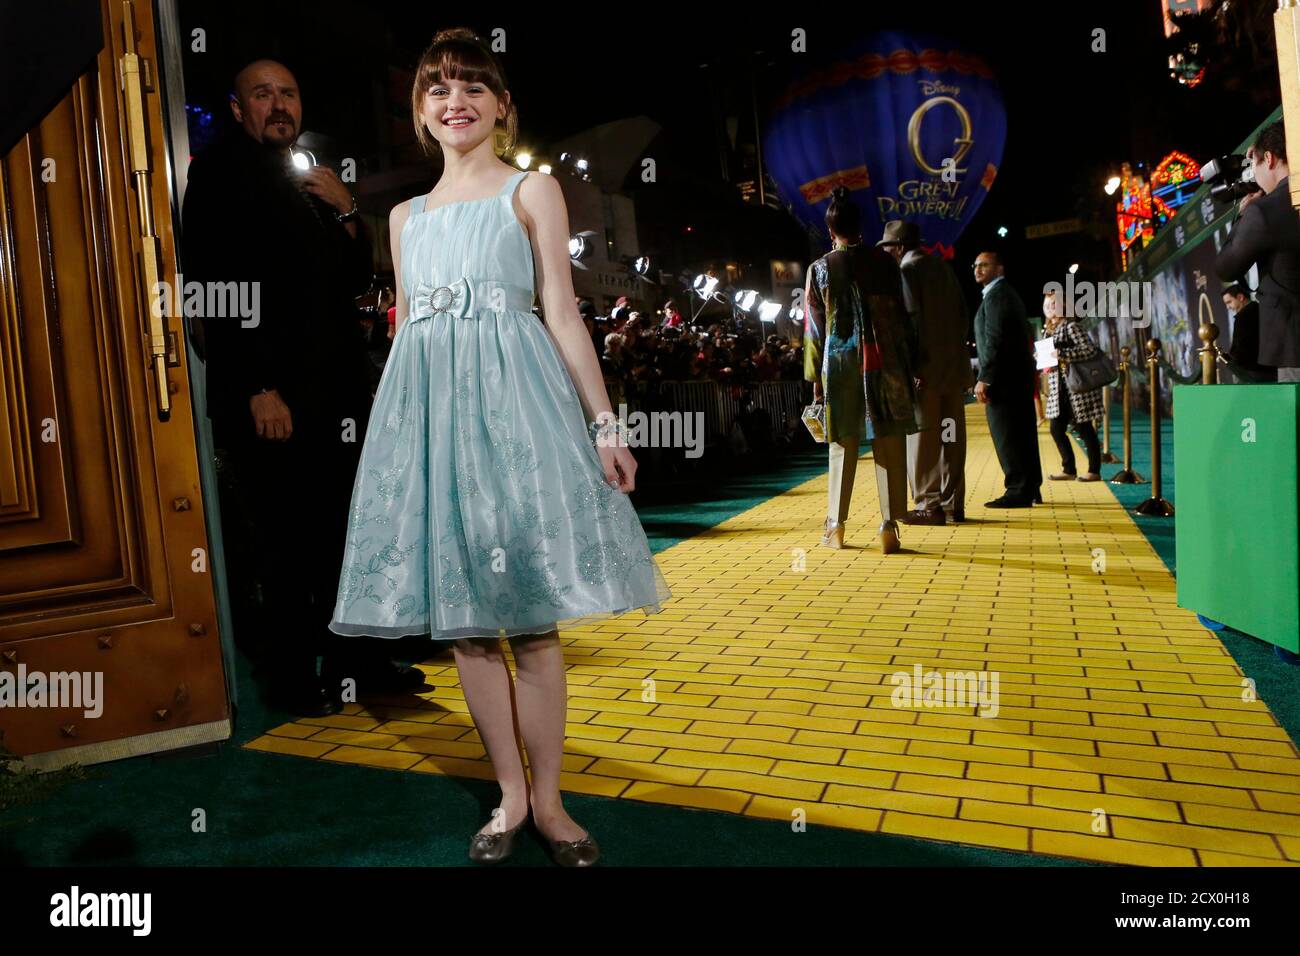 joey king oz the great and powerful premiere